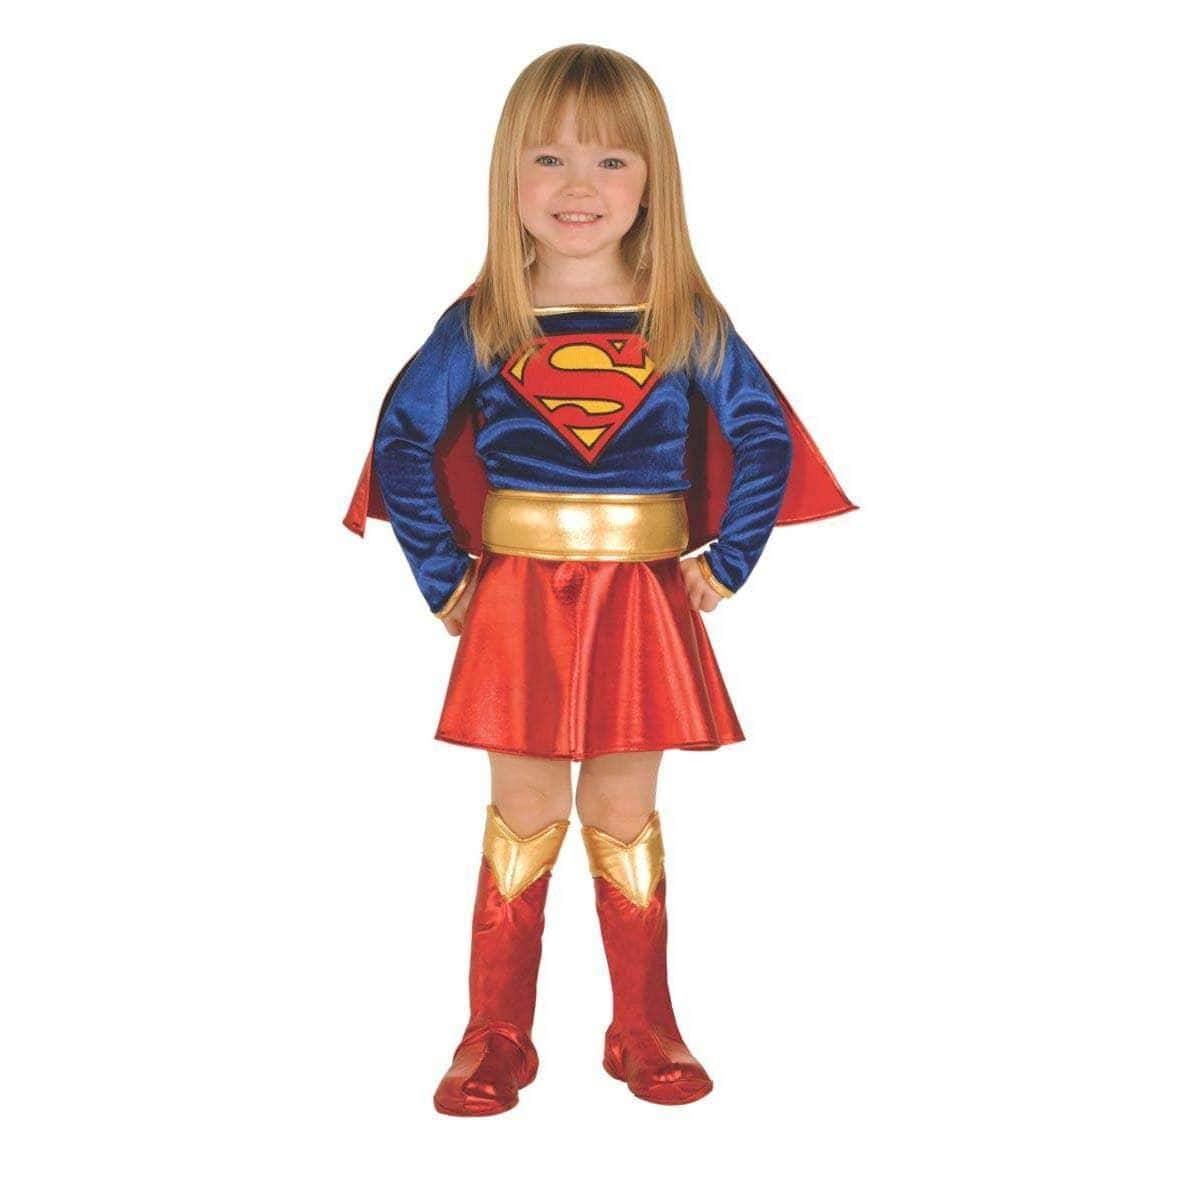 Buy Costumes Supergirl Costume for Kids, Supergirl sold at Party Expert